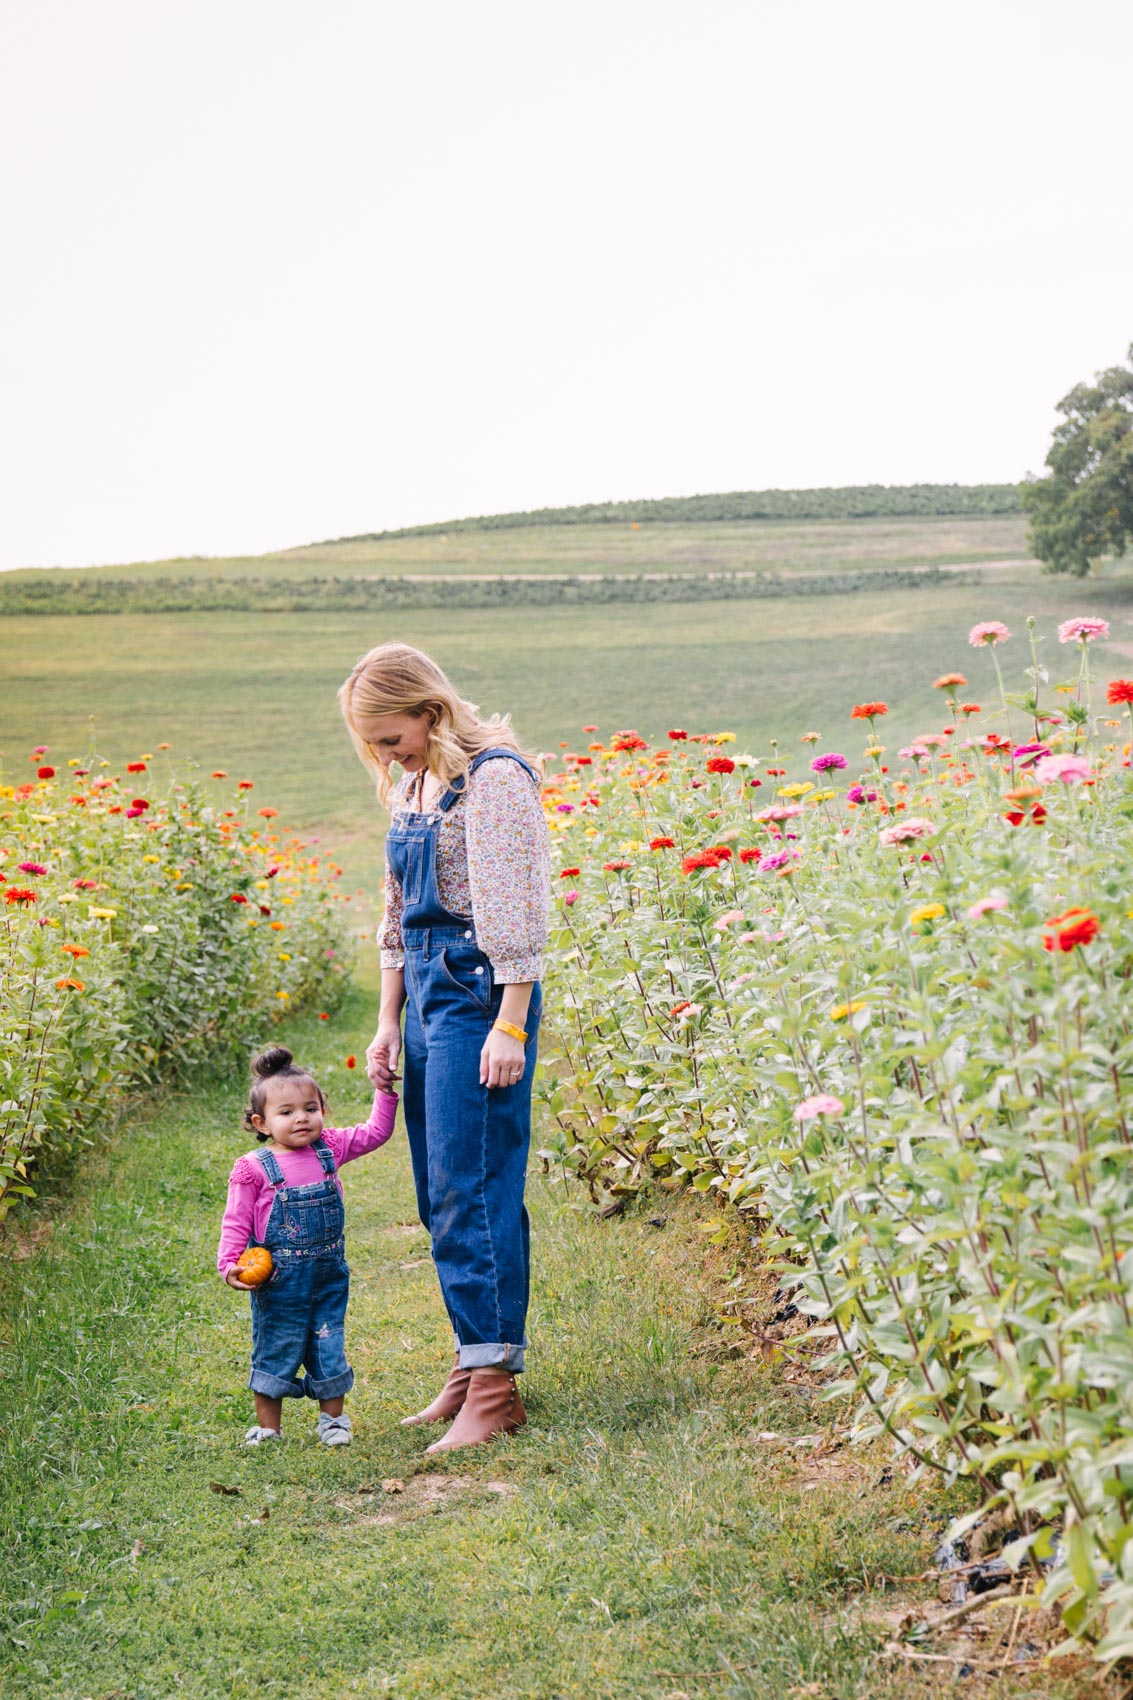 flower field photoshoot outfit | how to wear overalls | cute overalls outfit